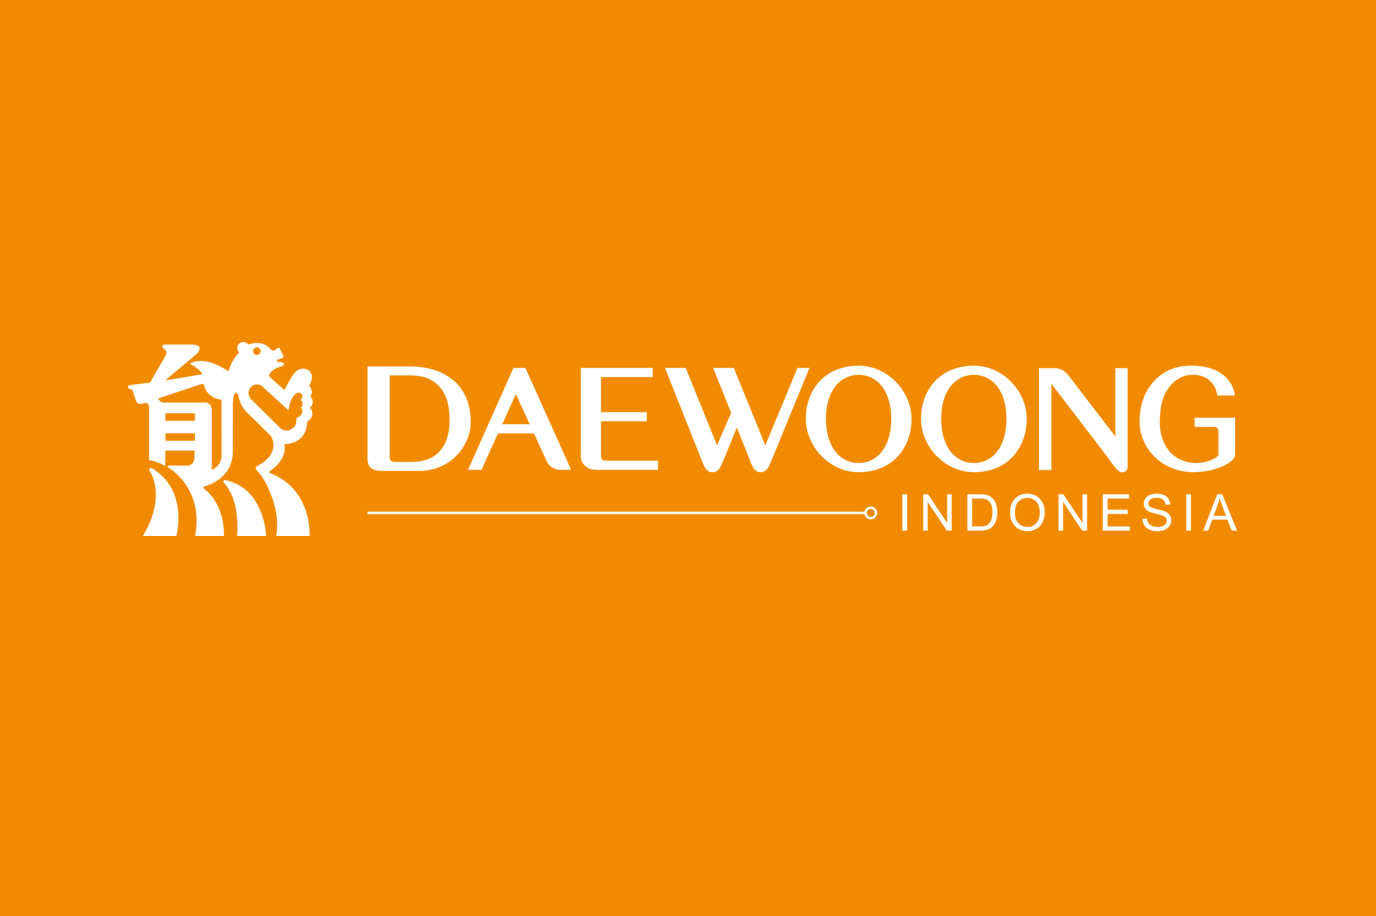 Daewoong Pharmaceutical Company Indonesia PR